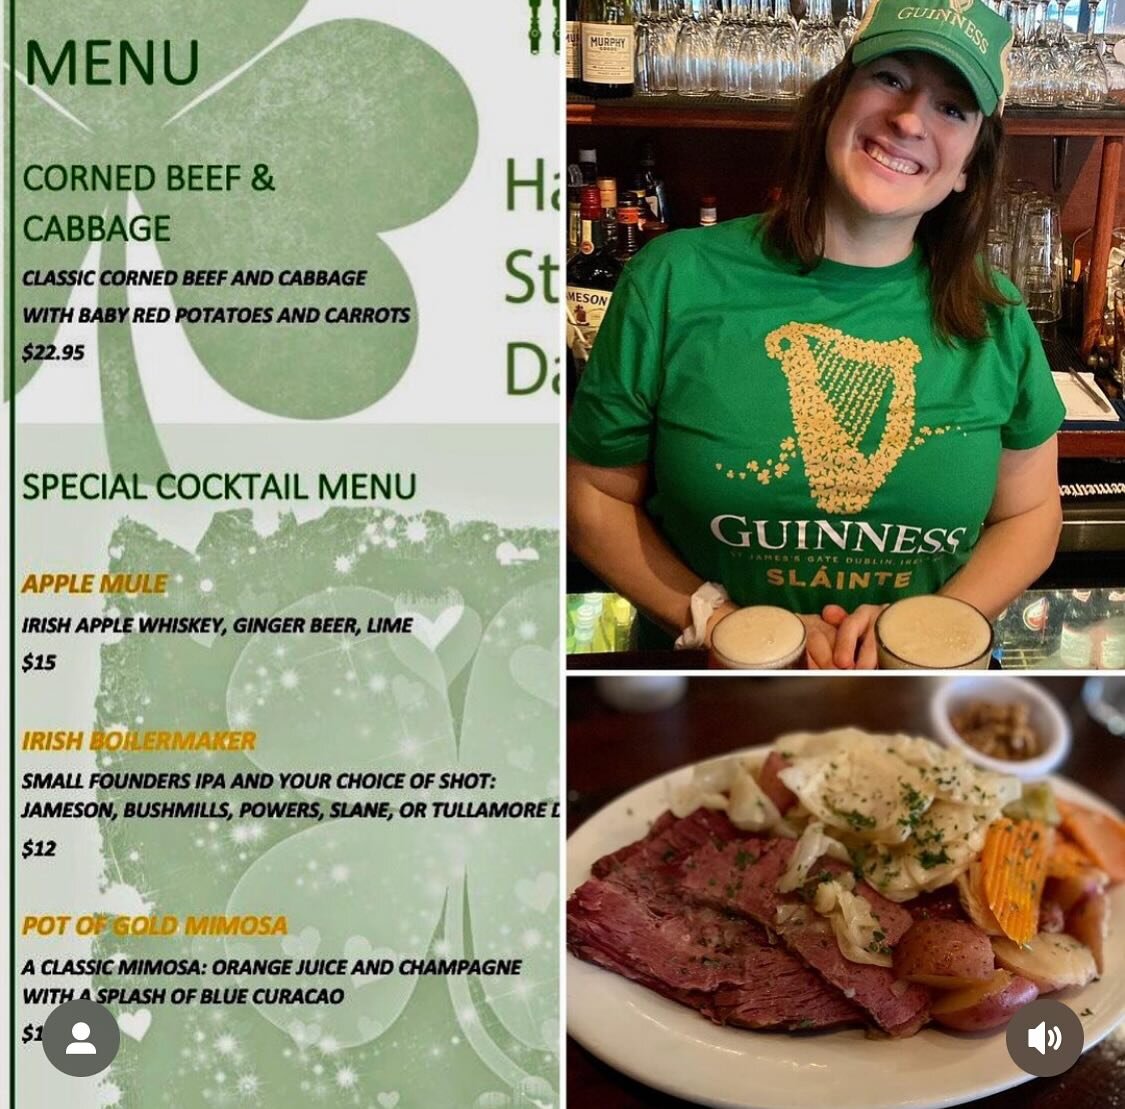 Corned beef and Cabbage is back on the menu this weekend at @amsterdamalehousenyc!! And Guinness is on the menu 365!! Happy St. Patty&rsquo;s from all of us ☘️🇮🇪🍻 Come through and have a pint!